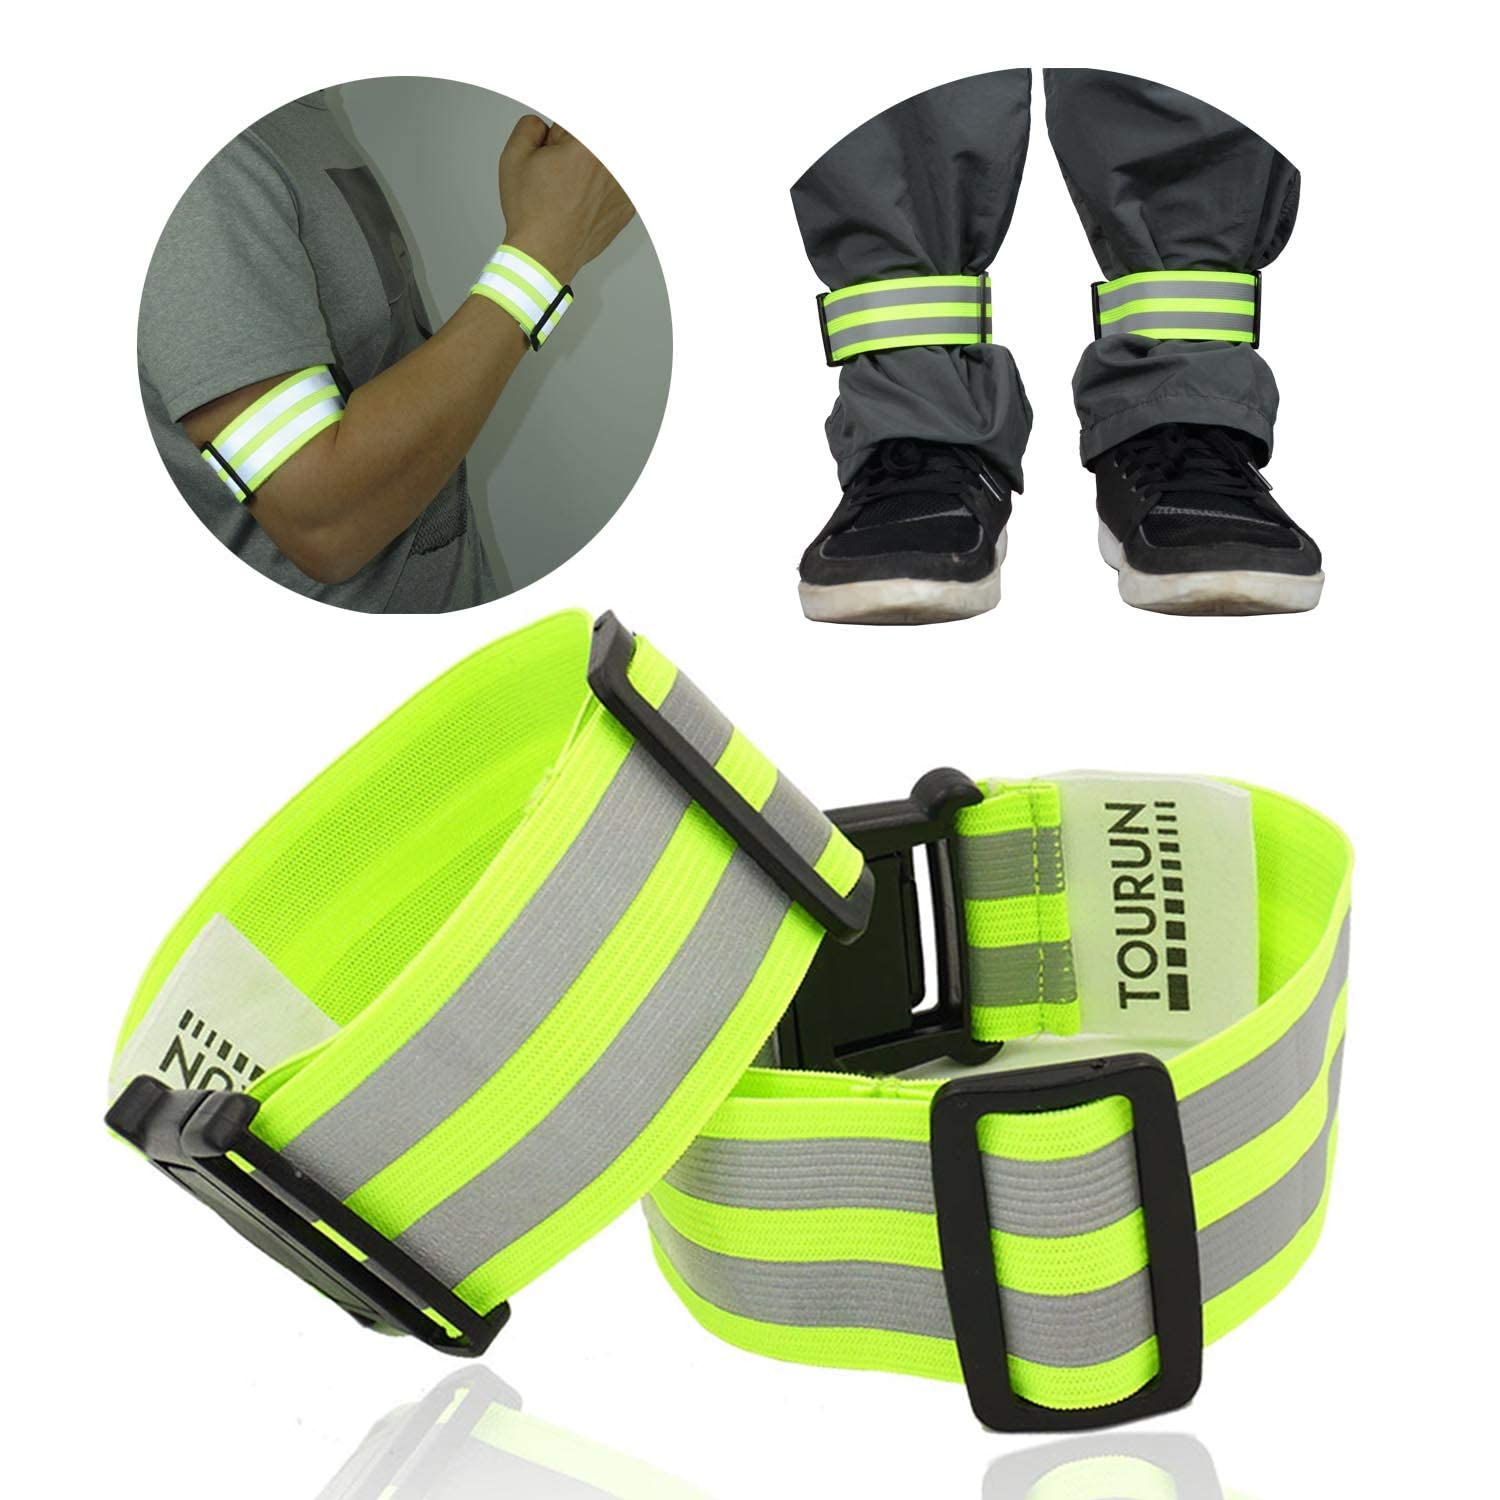 2 Work Boot Straps Pant Clips + 2 Adjustable Leg Strap Ankle Strap